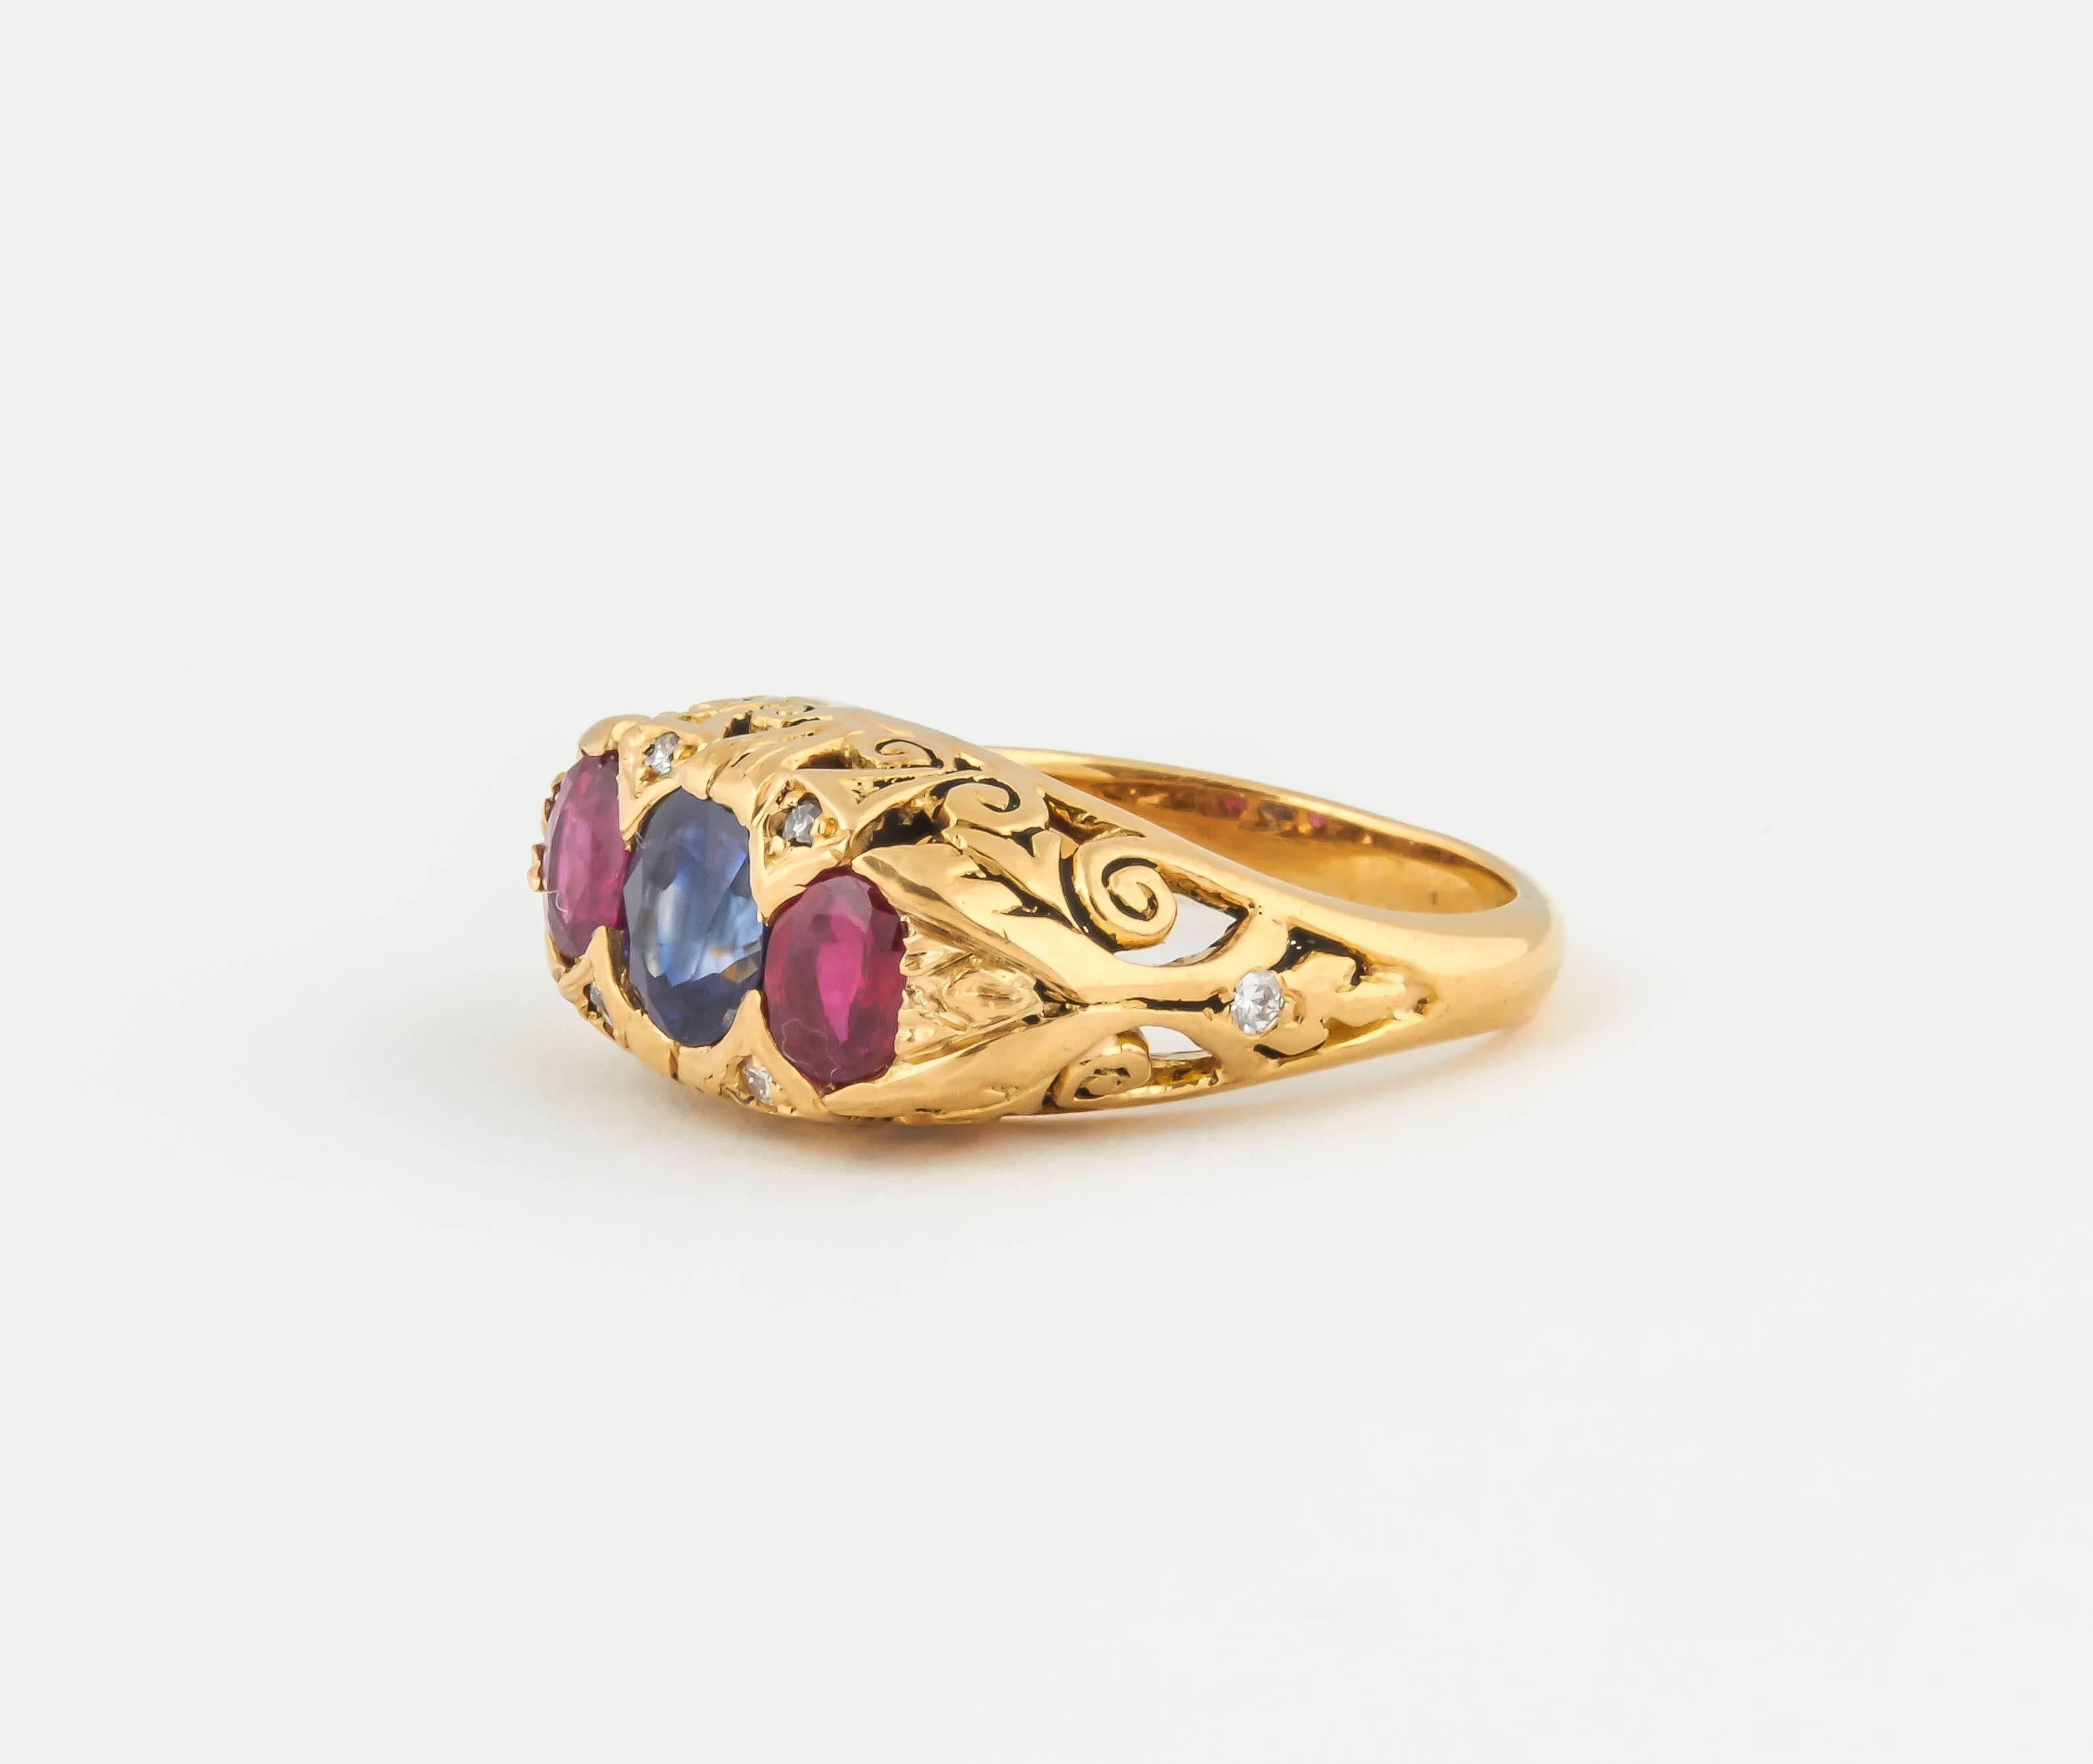 Beautifully carved with a delicate scroll pattern, this ring is set with a  1 ct cushion cut sapphire and 2 oval rubies totaling .80 ct.
The scroll pattern is highlighted with white dismonds all in 18kt gold.The ring is size 6 1/4 and can be sized.